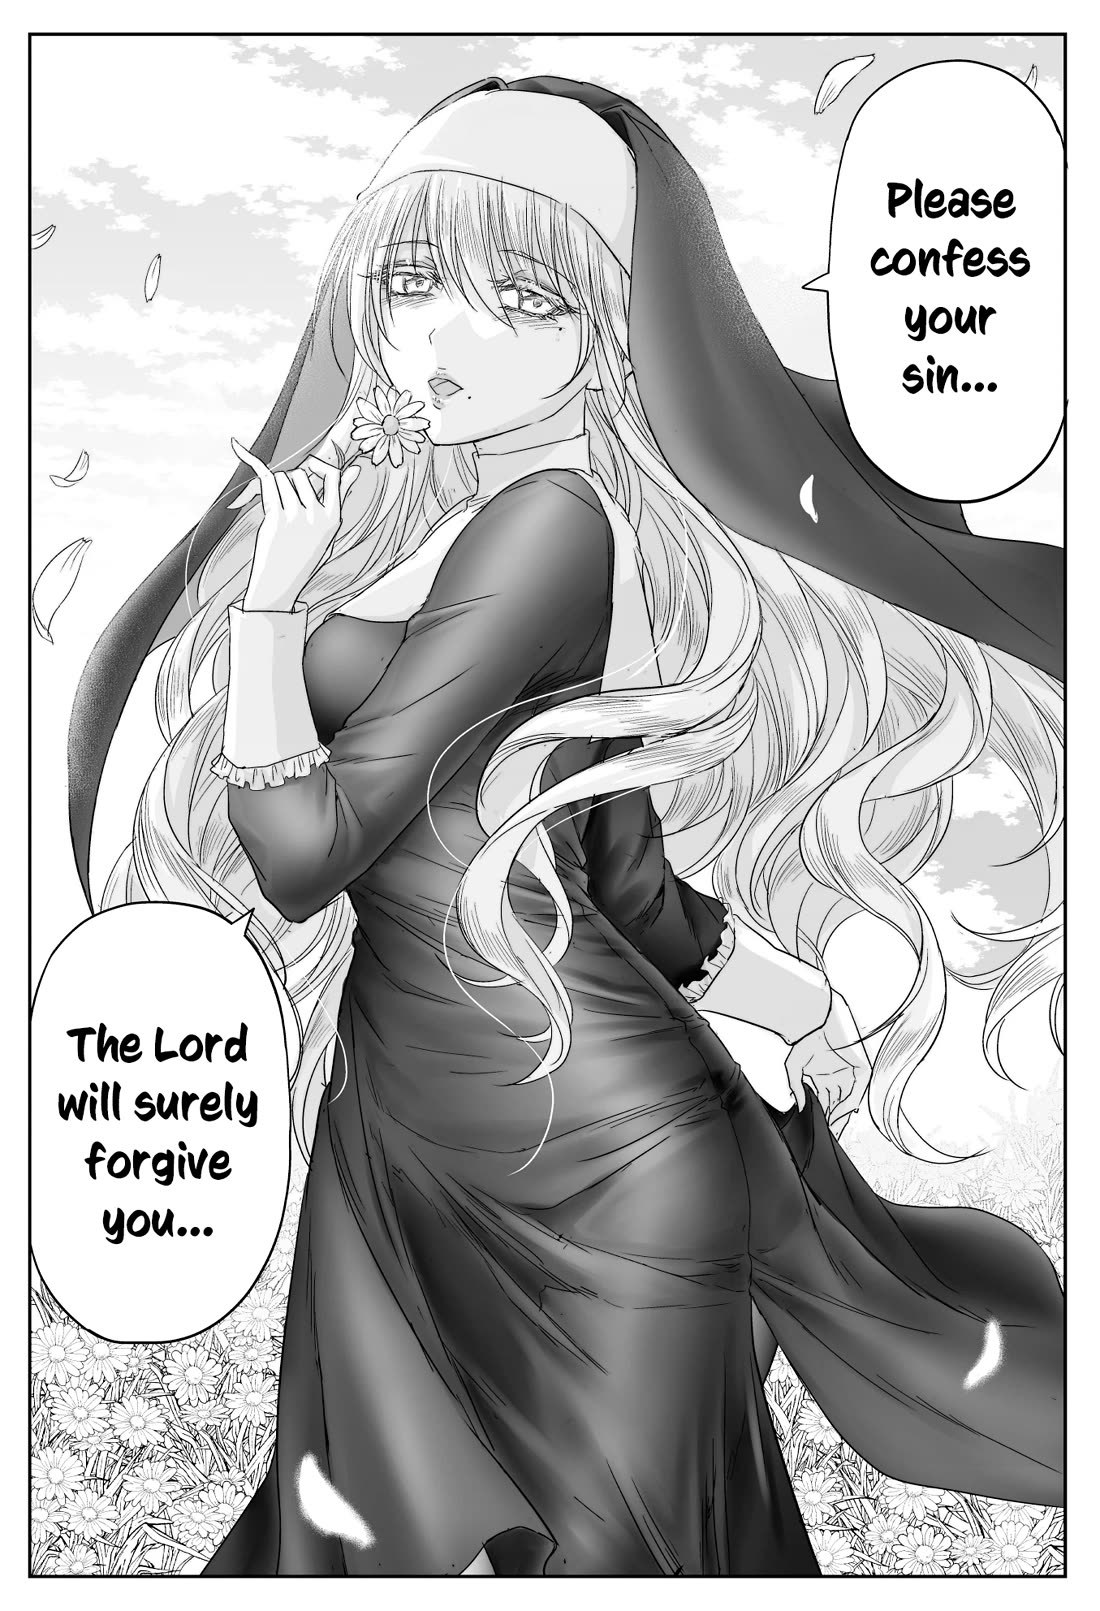 The Sister Of Strength Feats - chapter 34 - #1